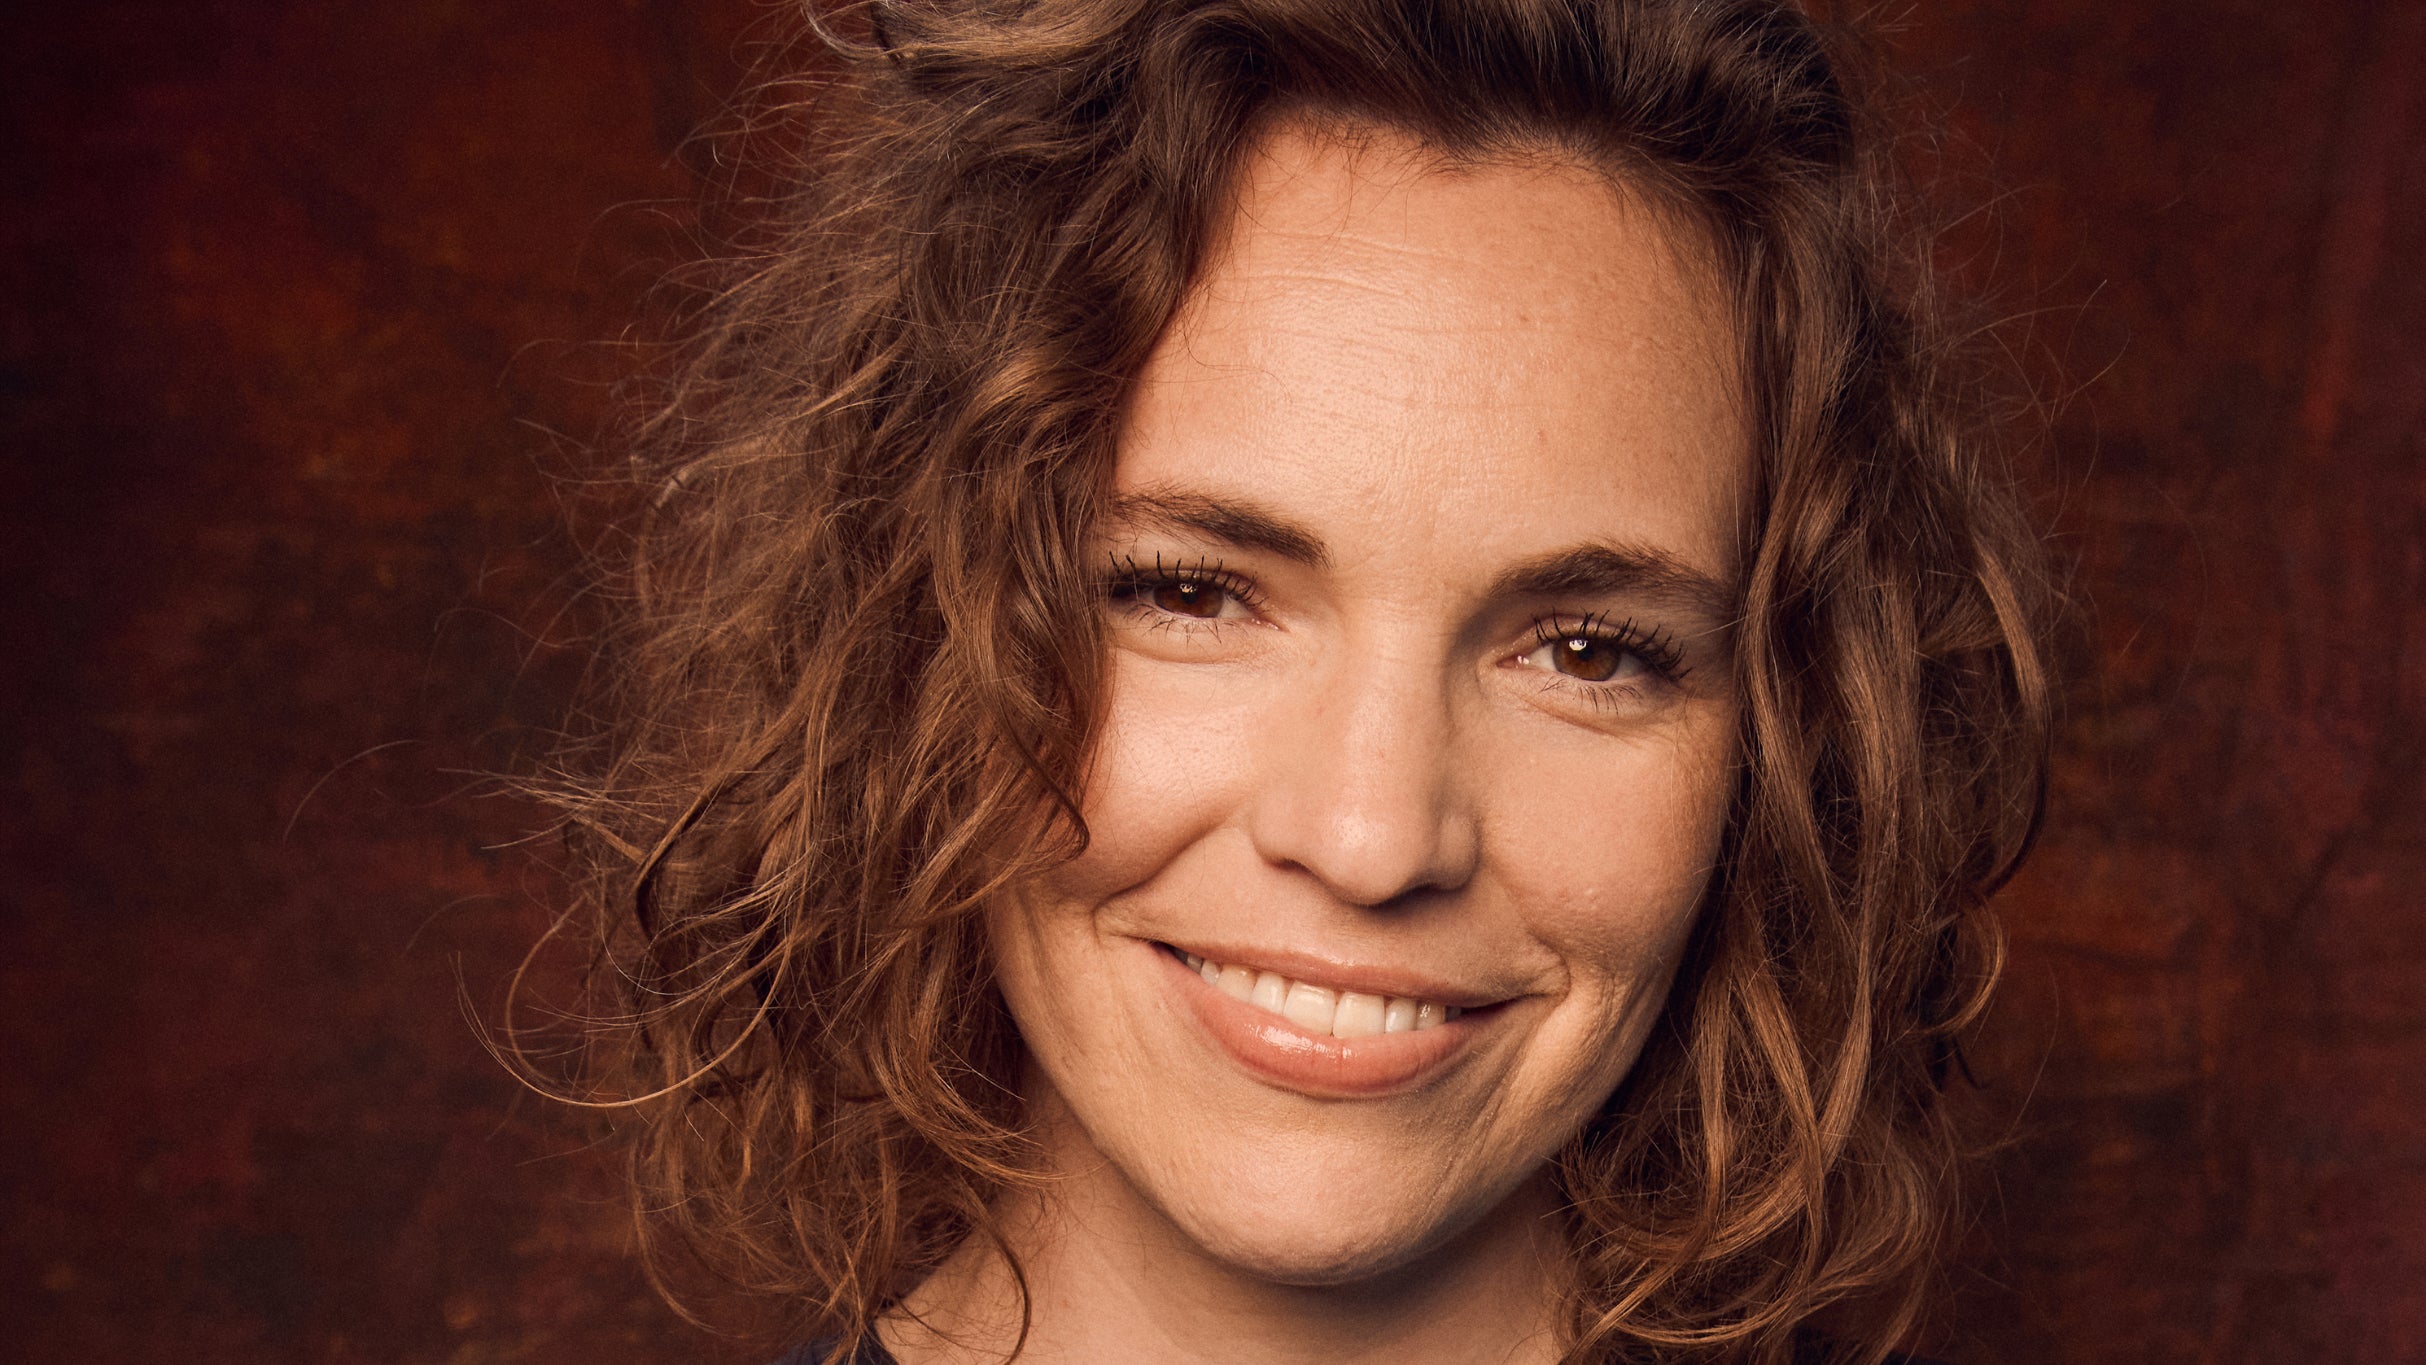 Beth Stelling presale password for real tickets in Somerville